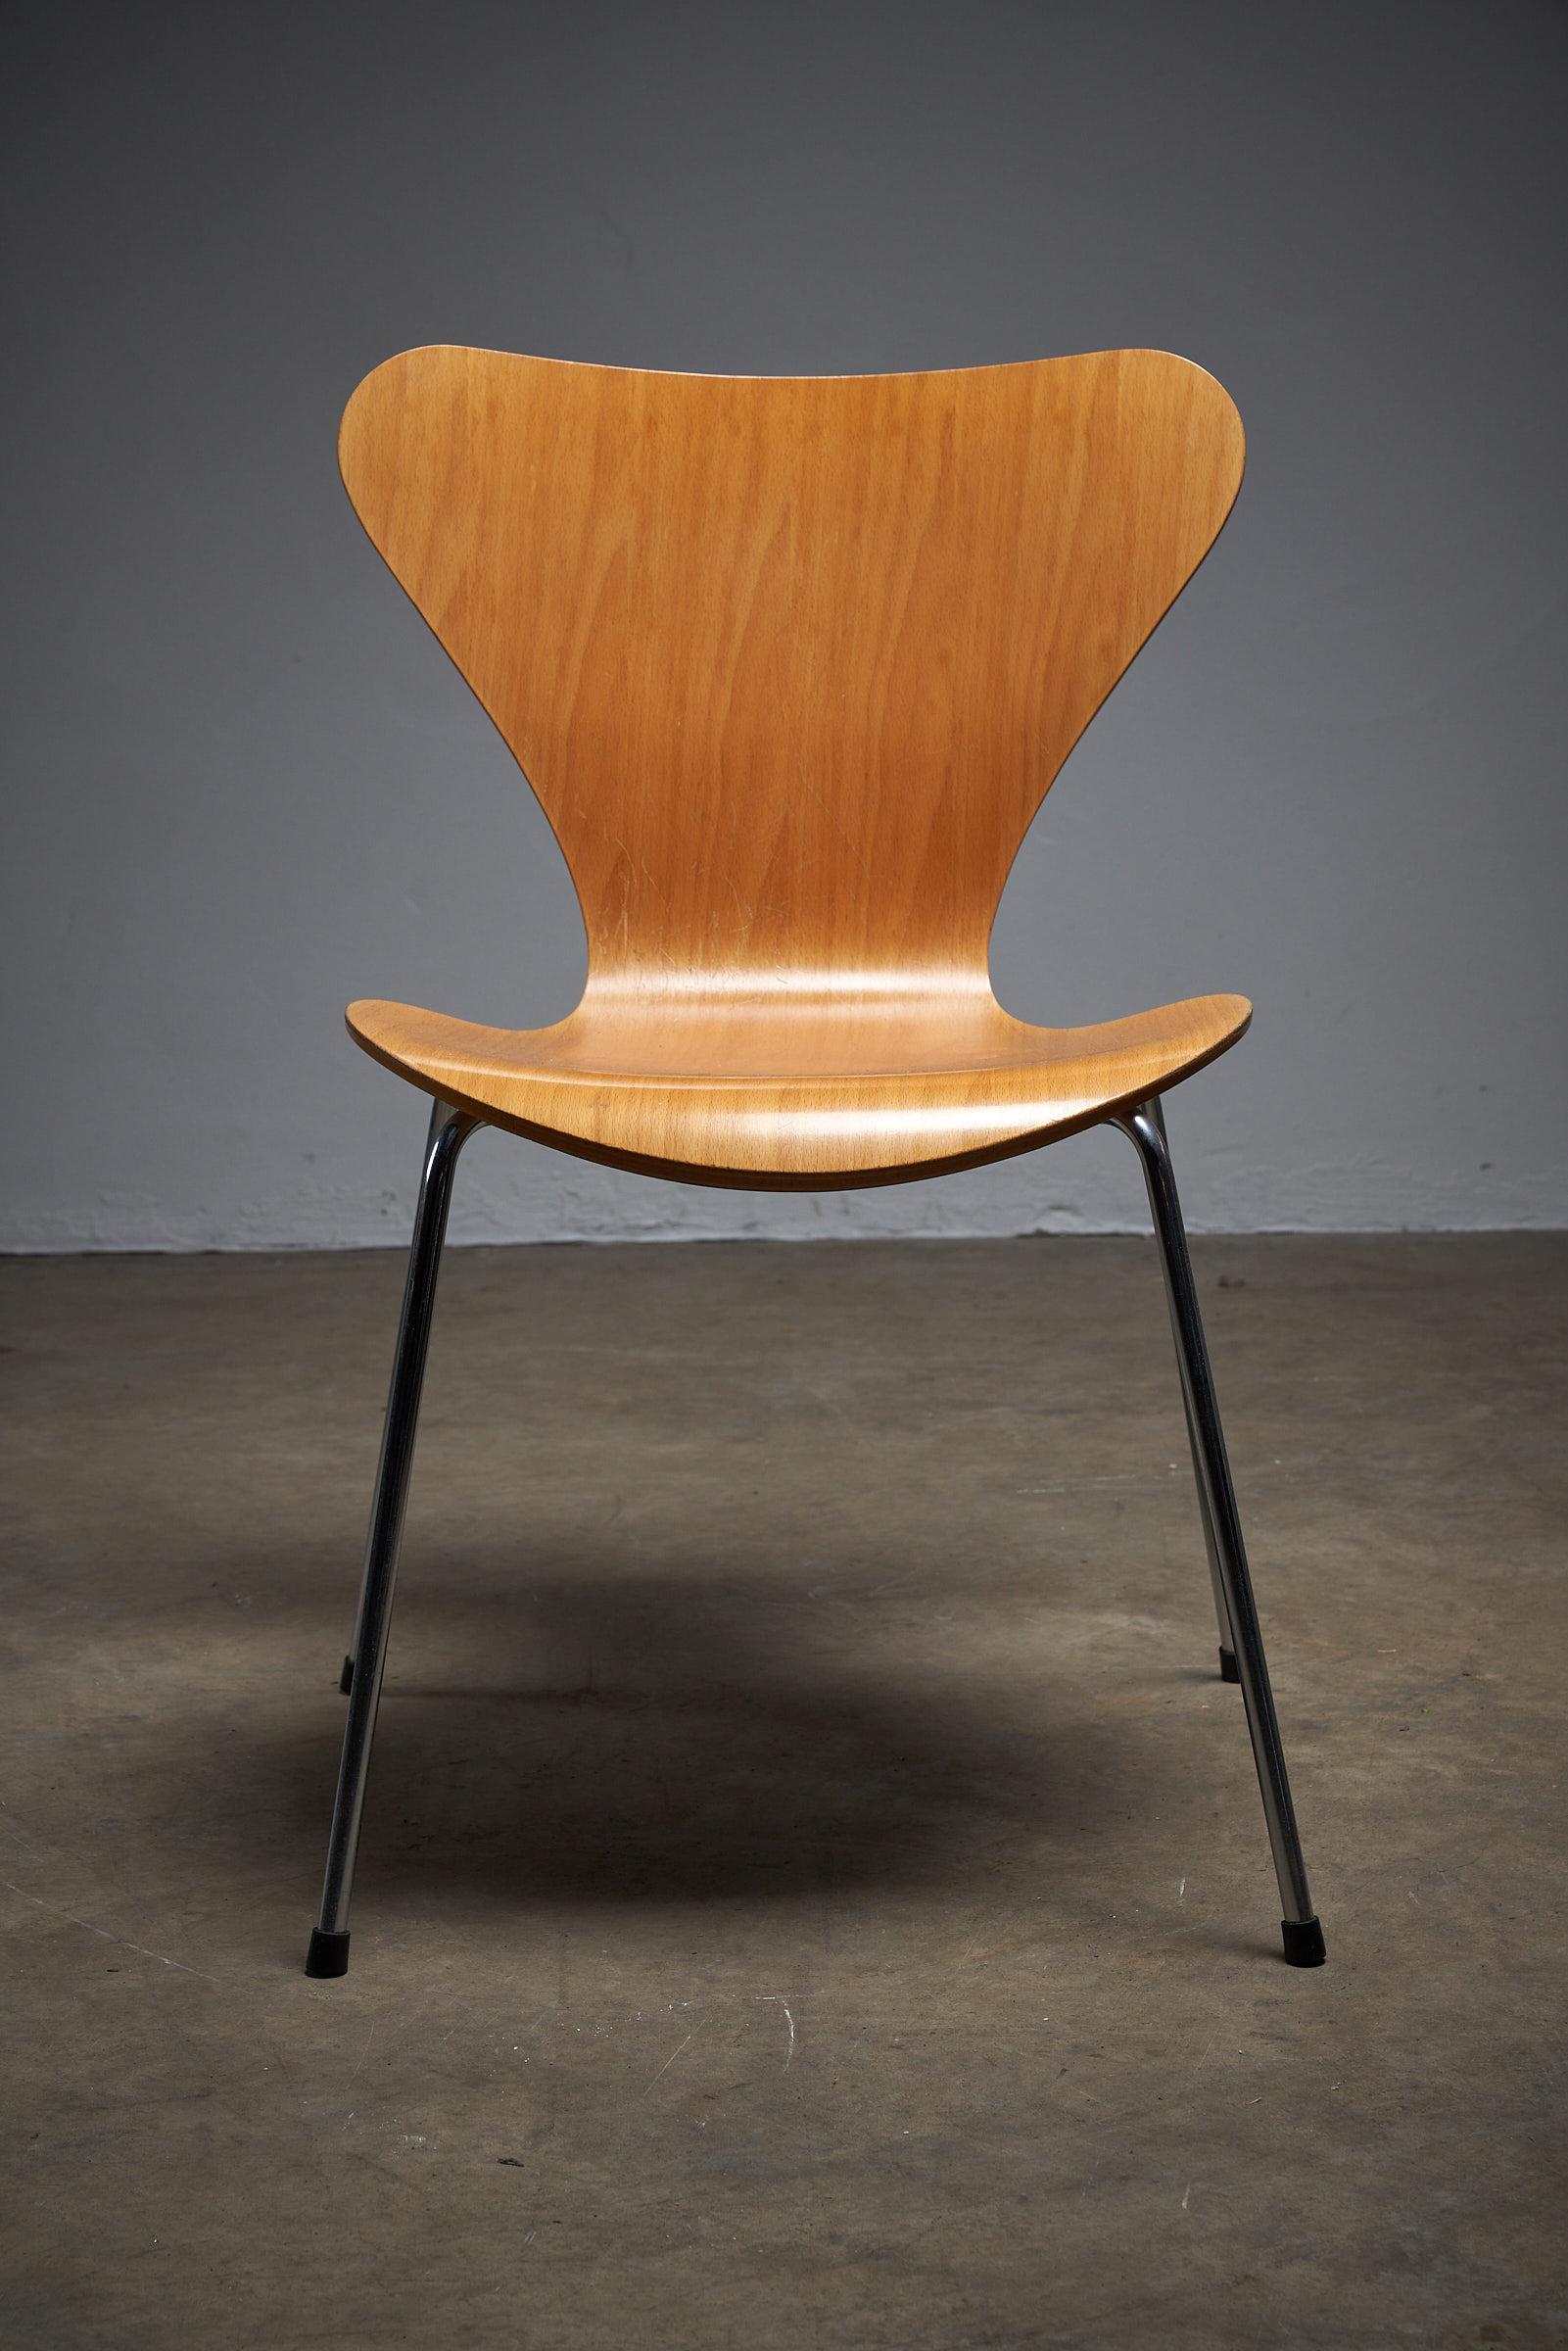 Hand-Crafted Arne Jacobsen Model 7 Vintage Chairs for Fritz Hanssen, 12+ pieces For Sale